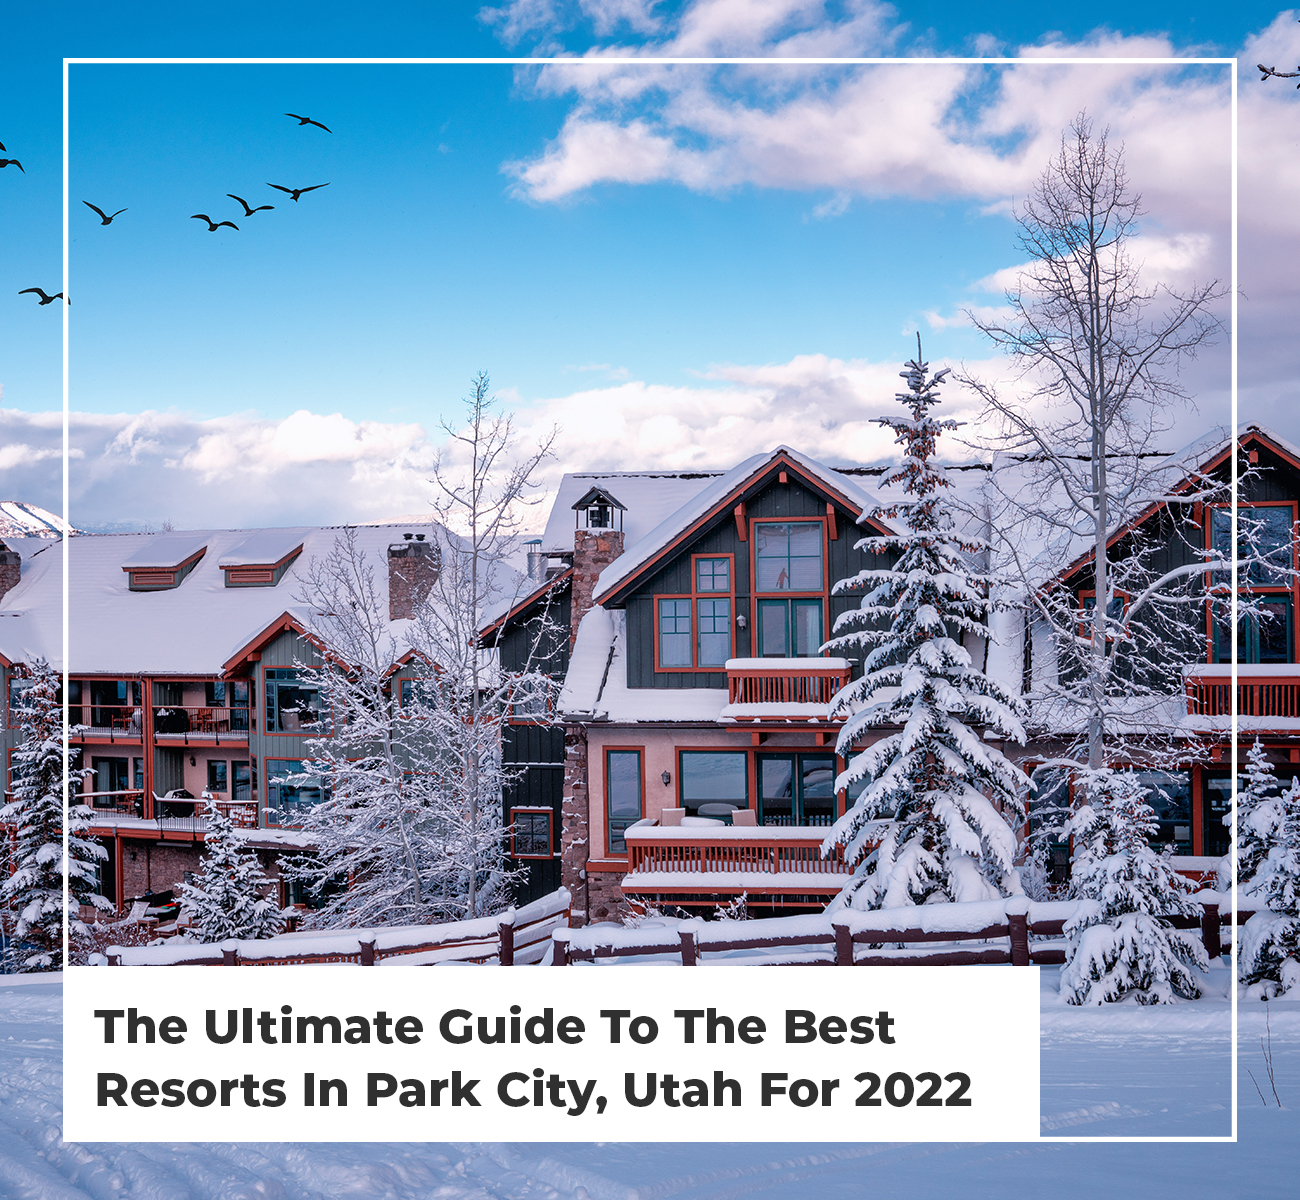 The Ultimate Guide To The Best Resorts In Park City, Utah For 2022